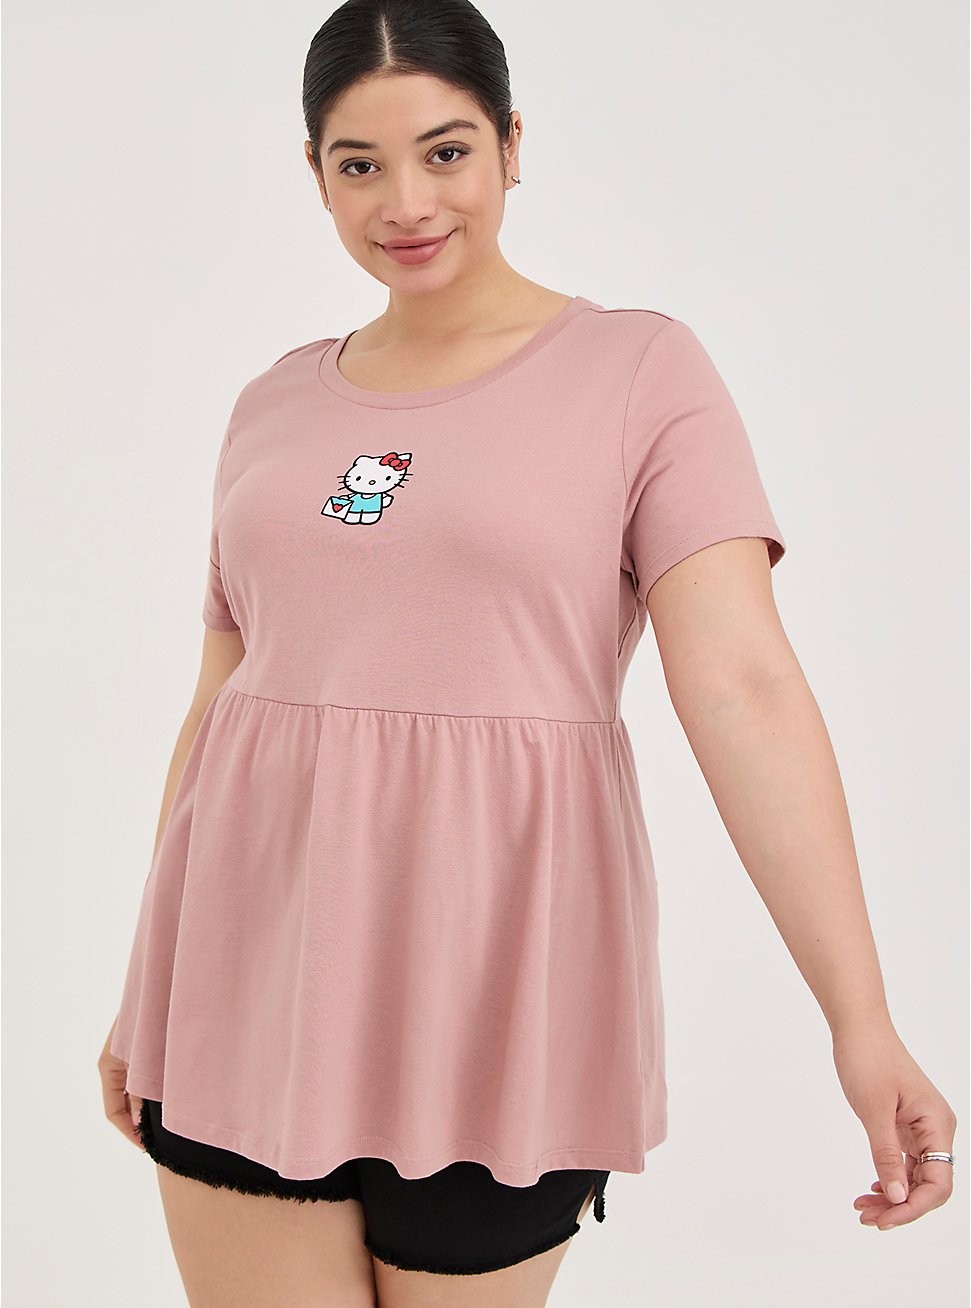 Hello Kitty Babydoll Top - Pink, DUSTY ROSE, hi-res